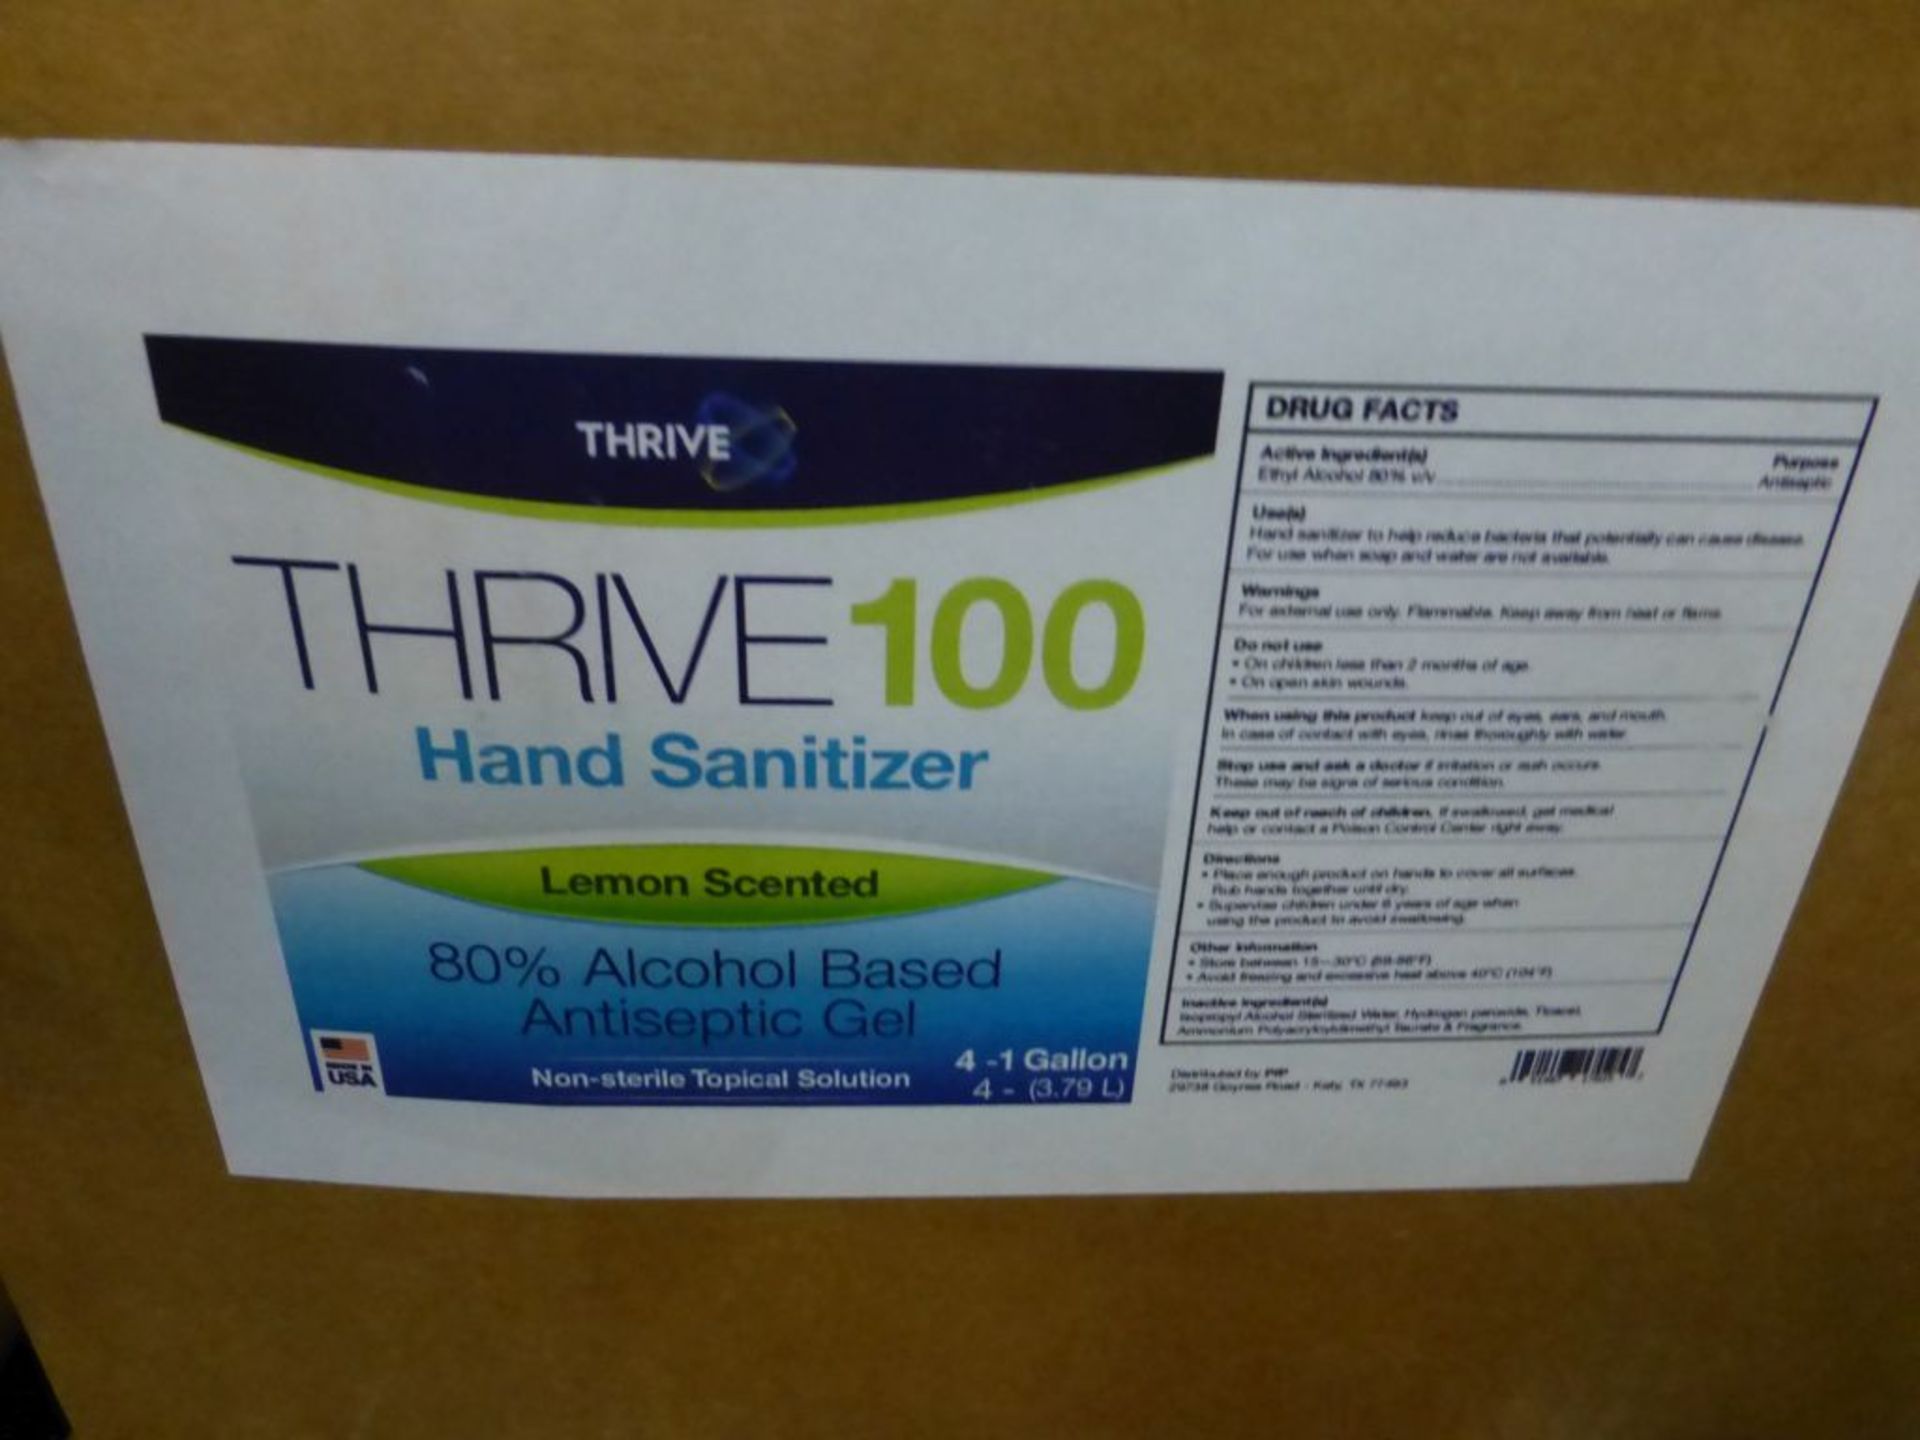 Lot of (6) 4-Gallon Cases of Thrive 100 Lemon Scented Hand Sanitizer - Image 5 of 7